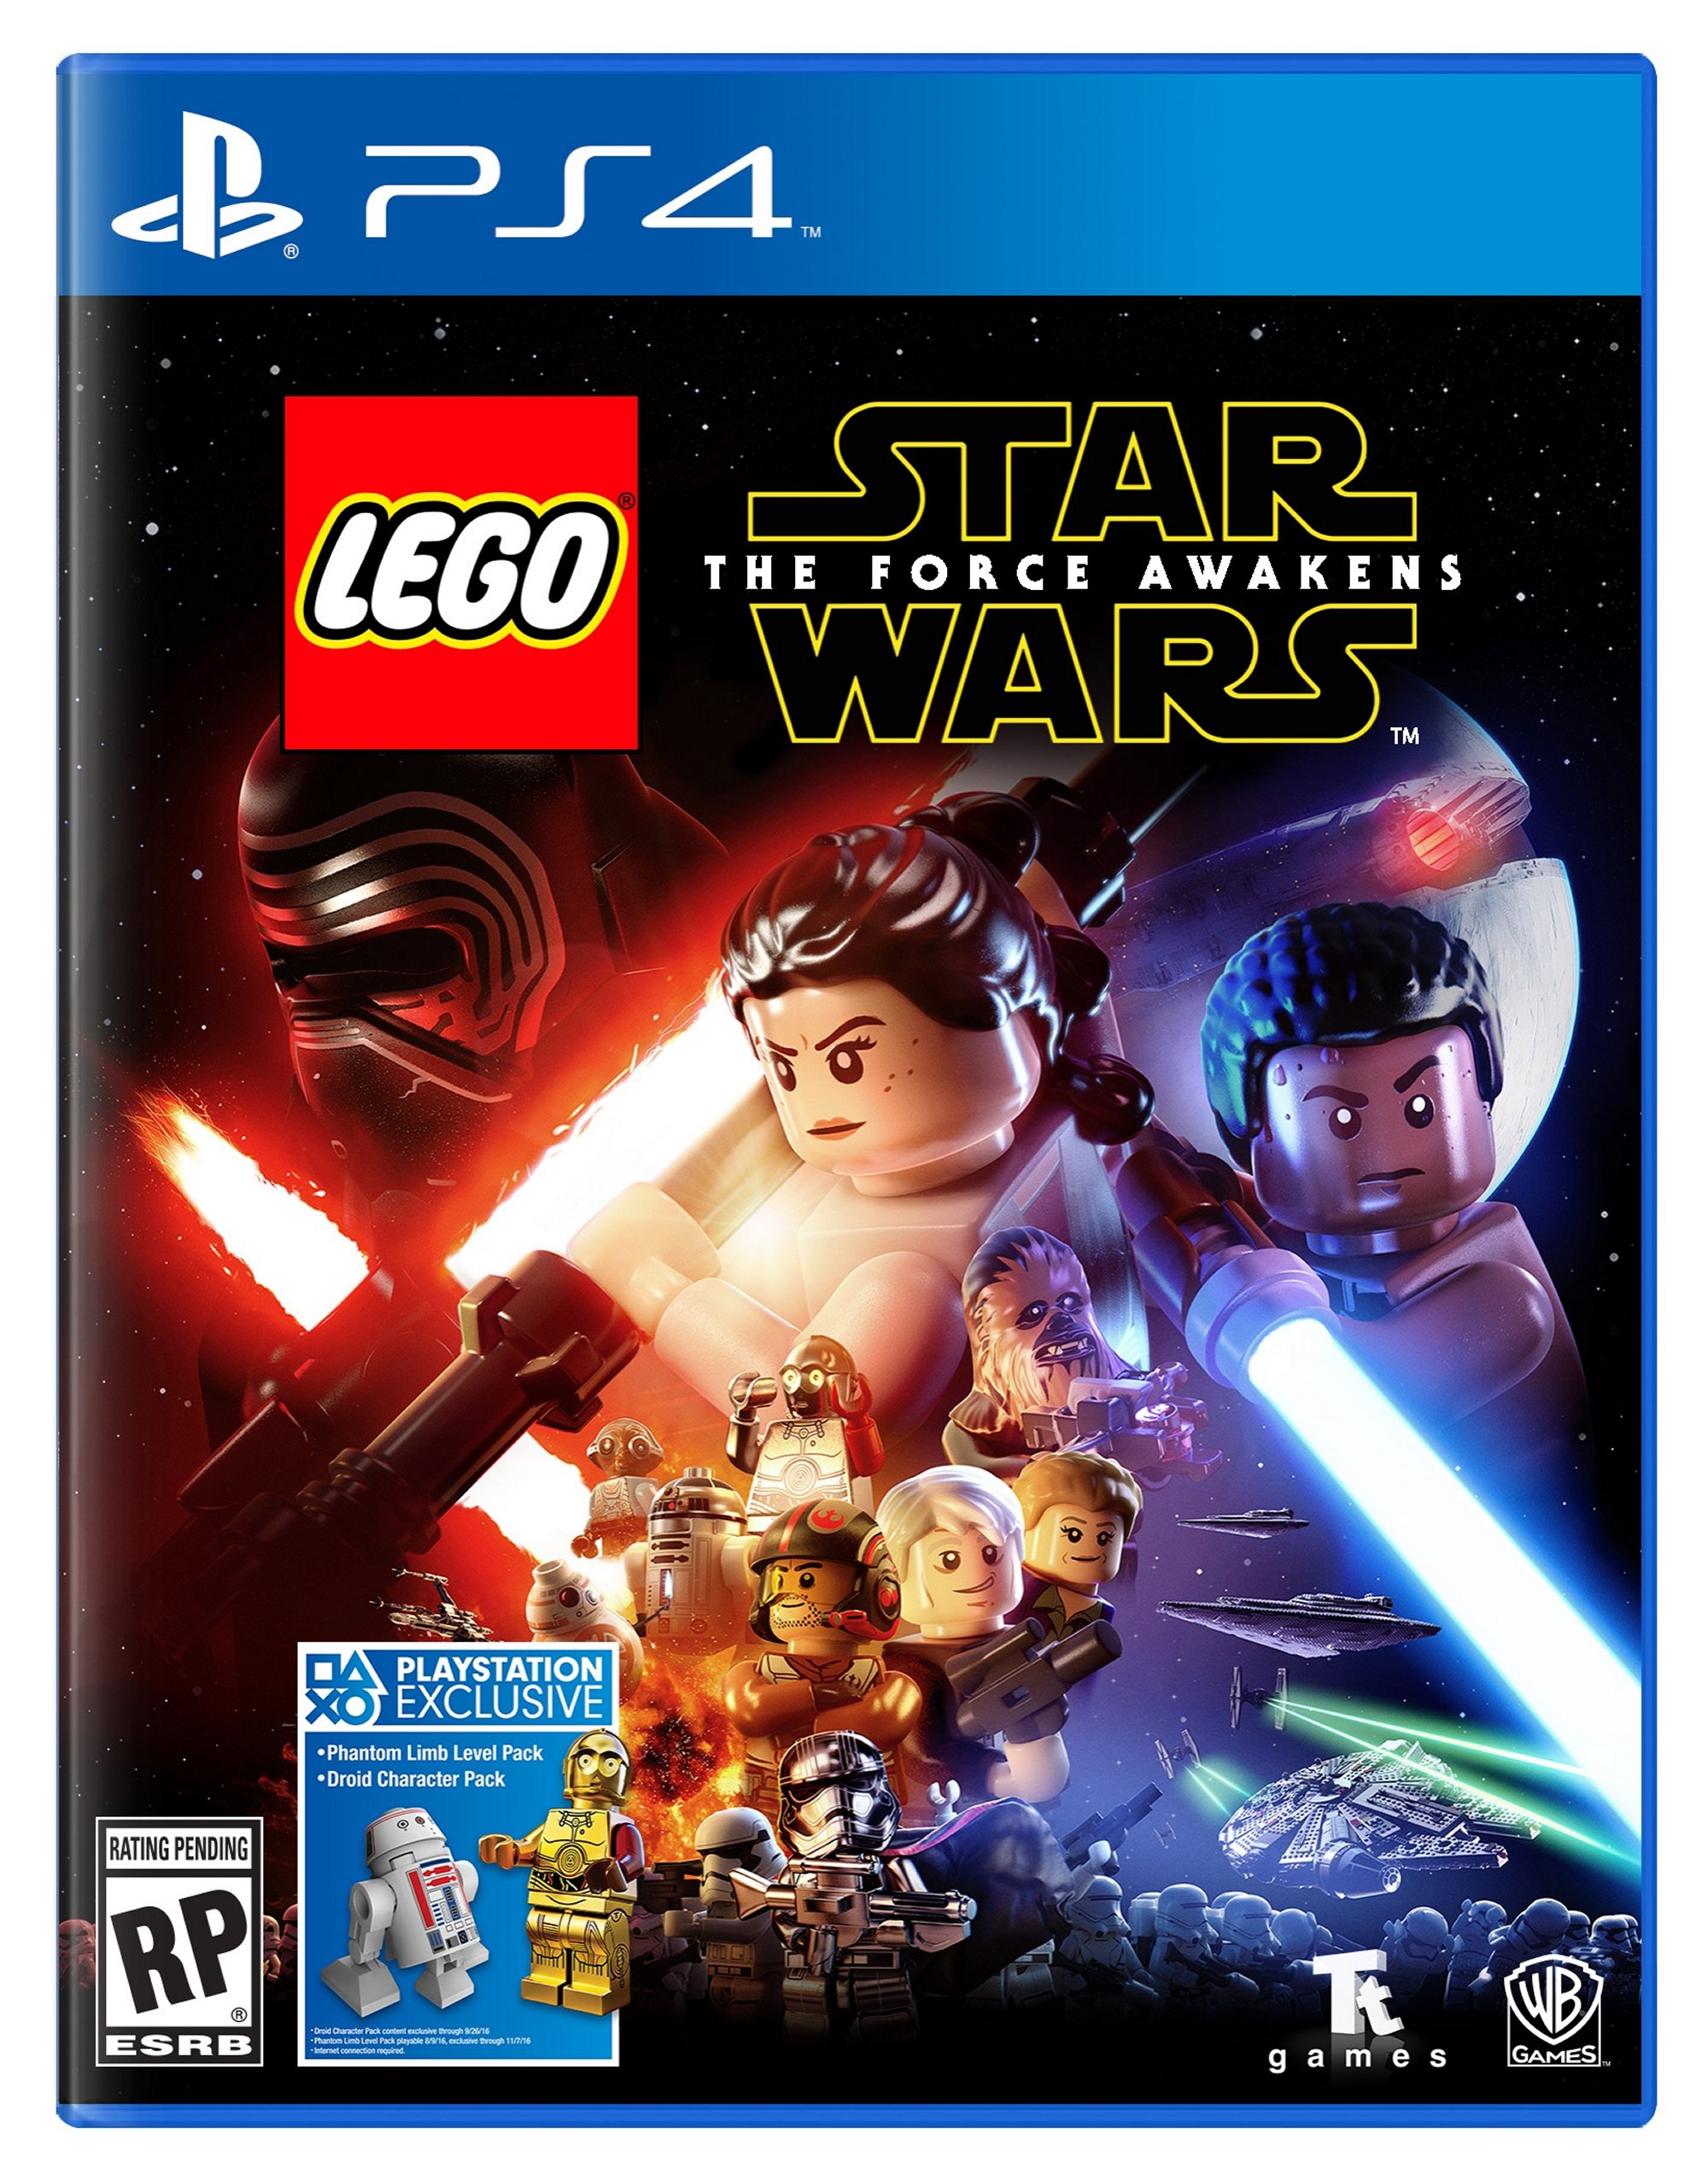 Dæmon Implement solopgang LEGO® Star Wars™: The Force Awakens PLAYSTATION® 4 Video Game 5005139 |  Star Wars™ | Buy online at the Official LEGO® Shop US